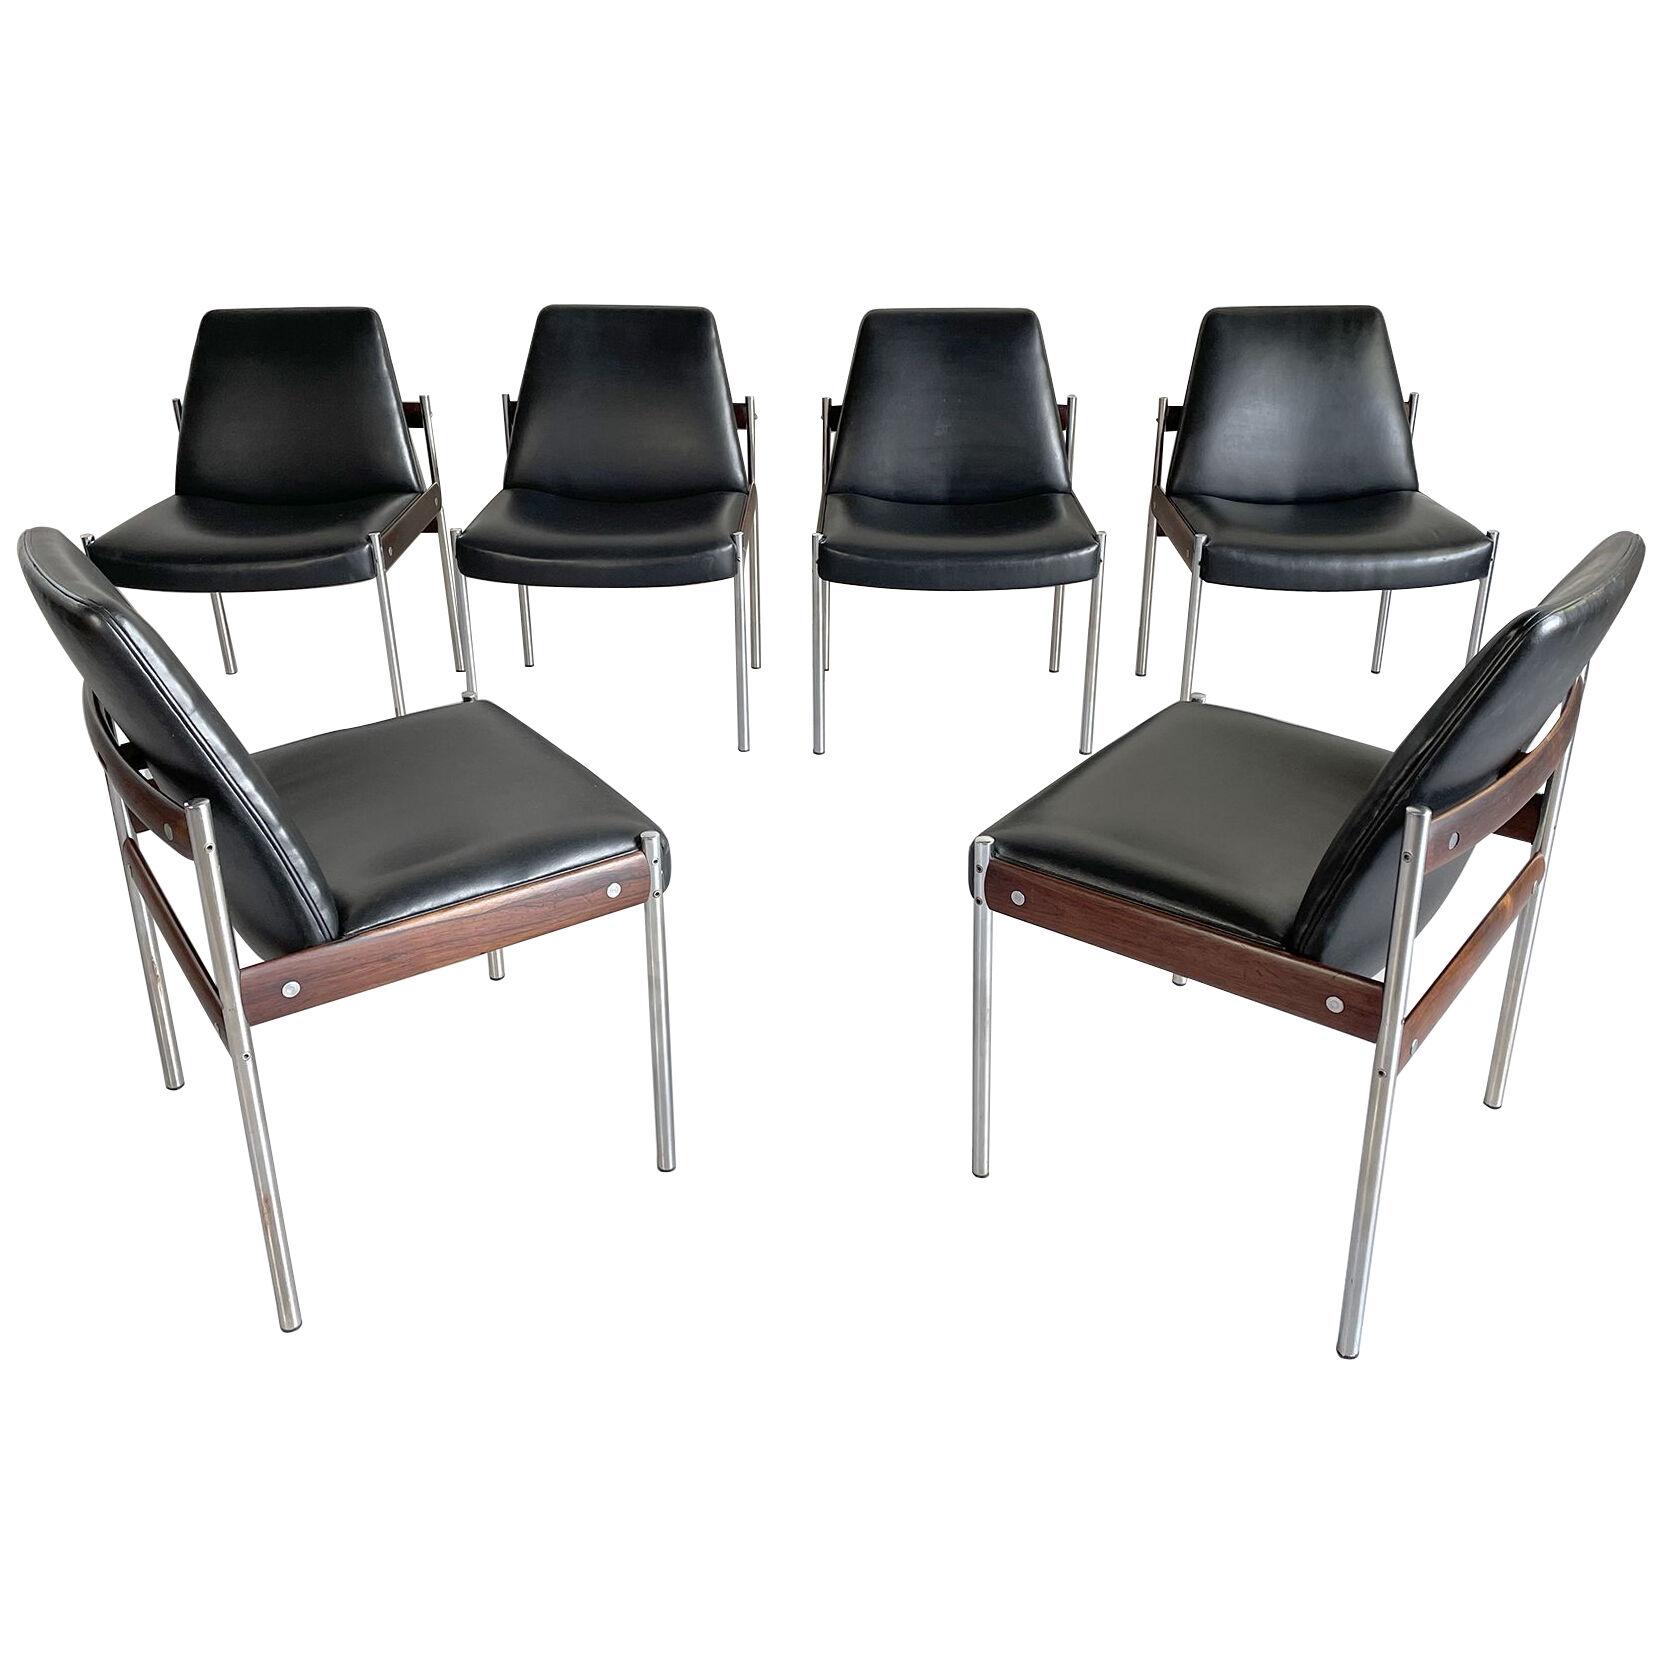 series of 6 "3001" chairs